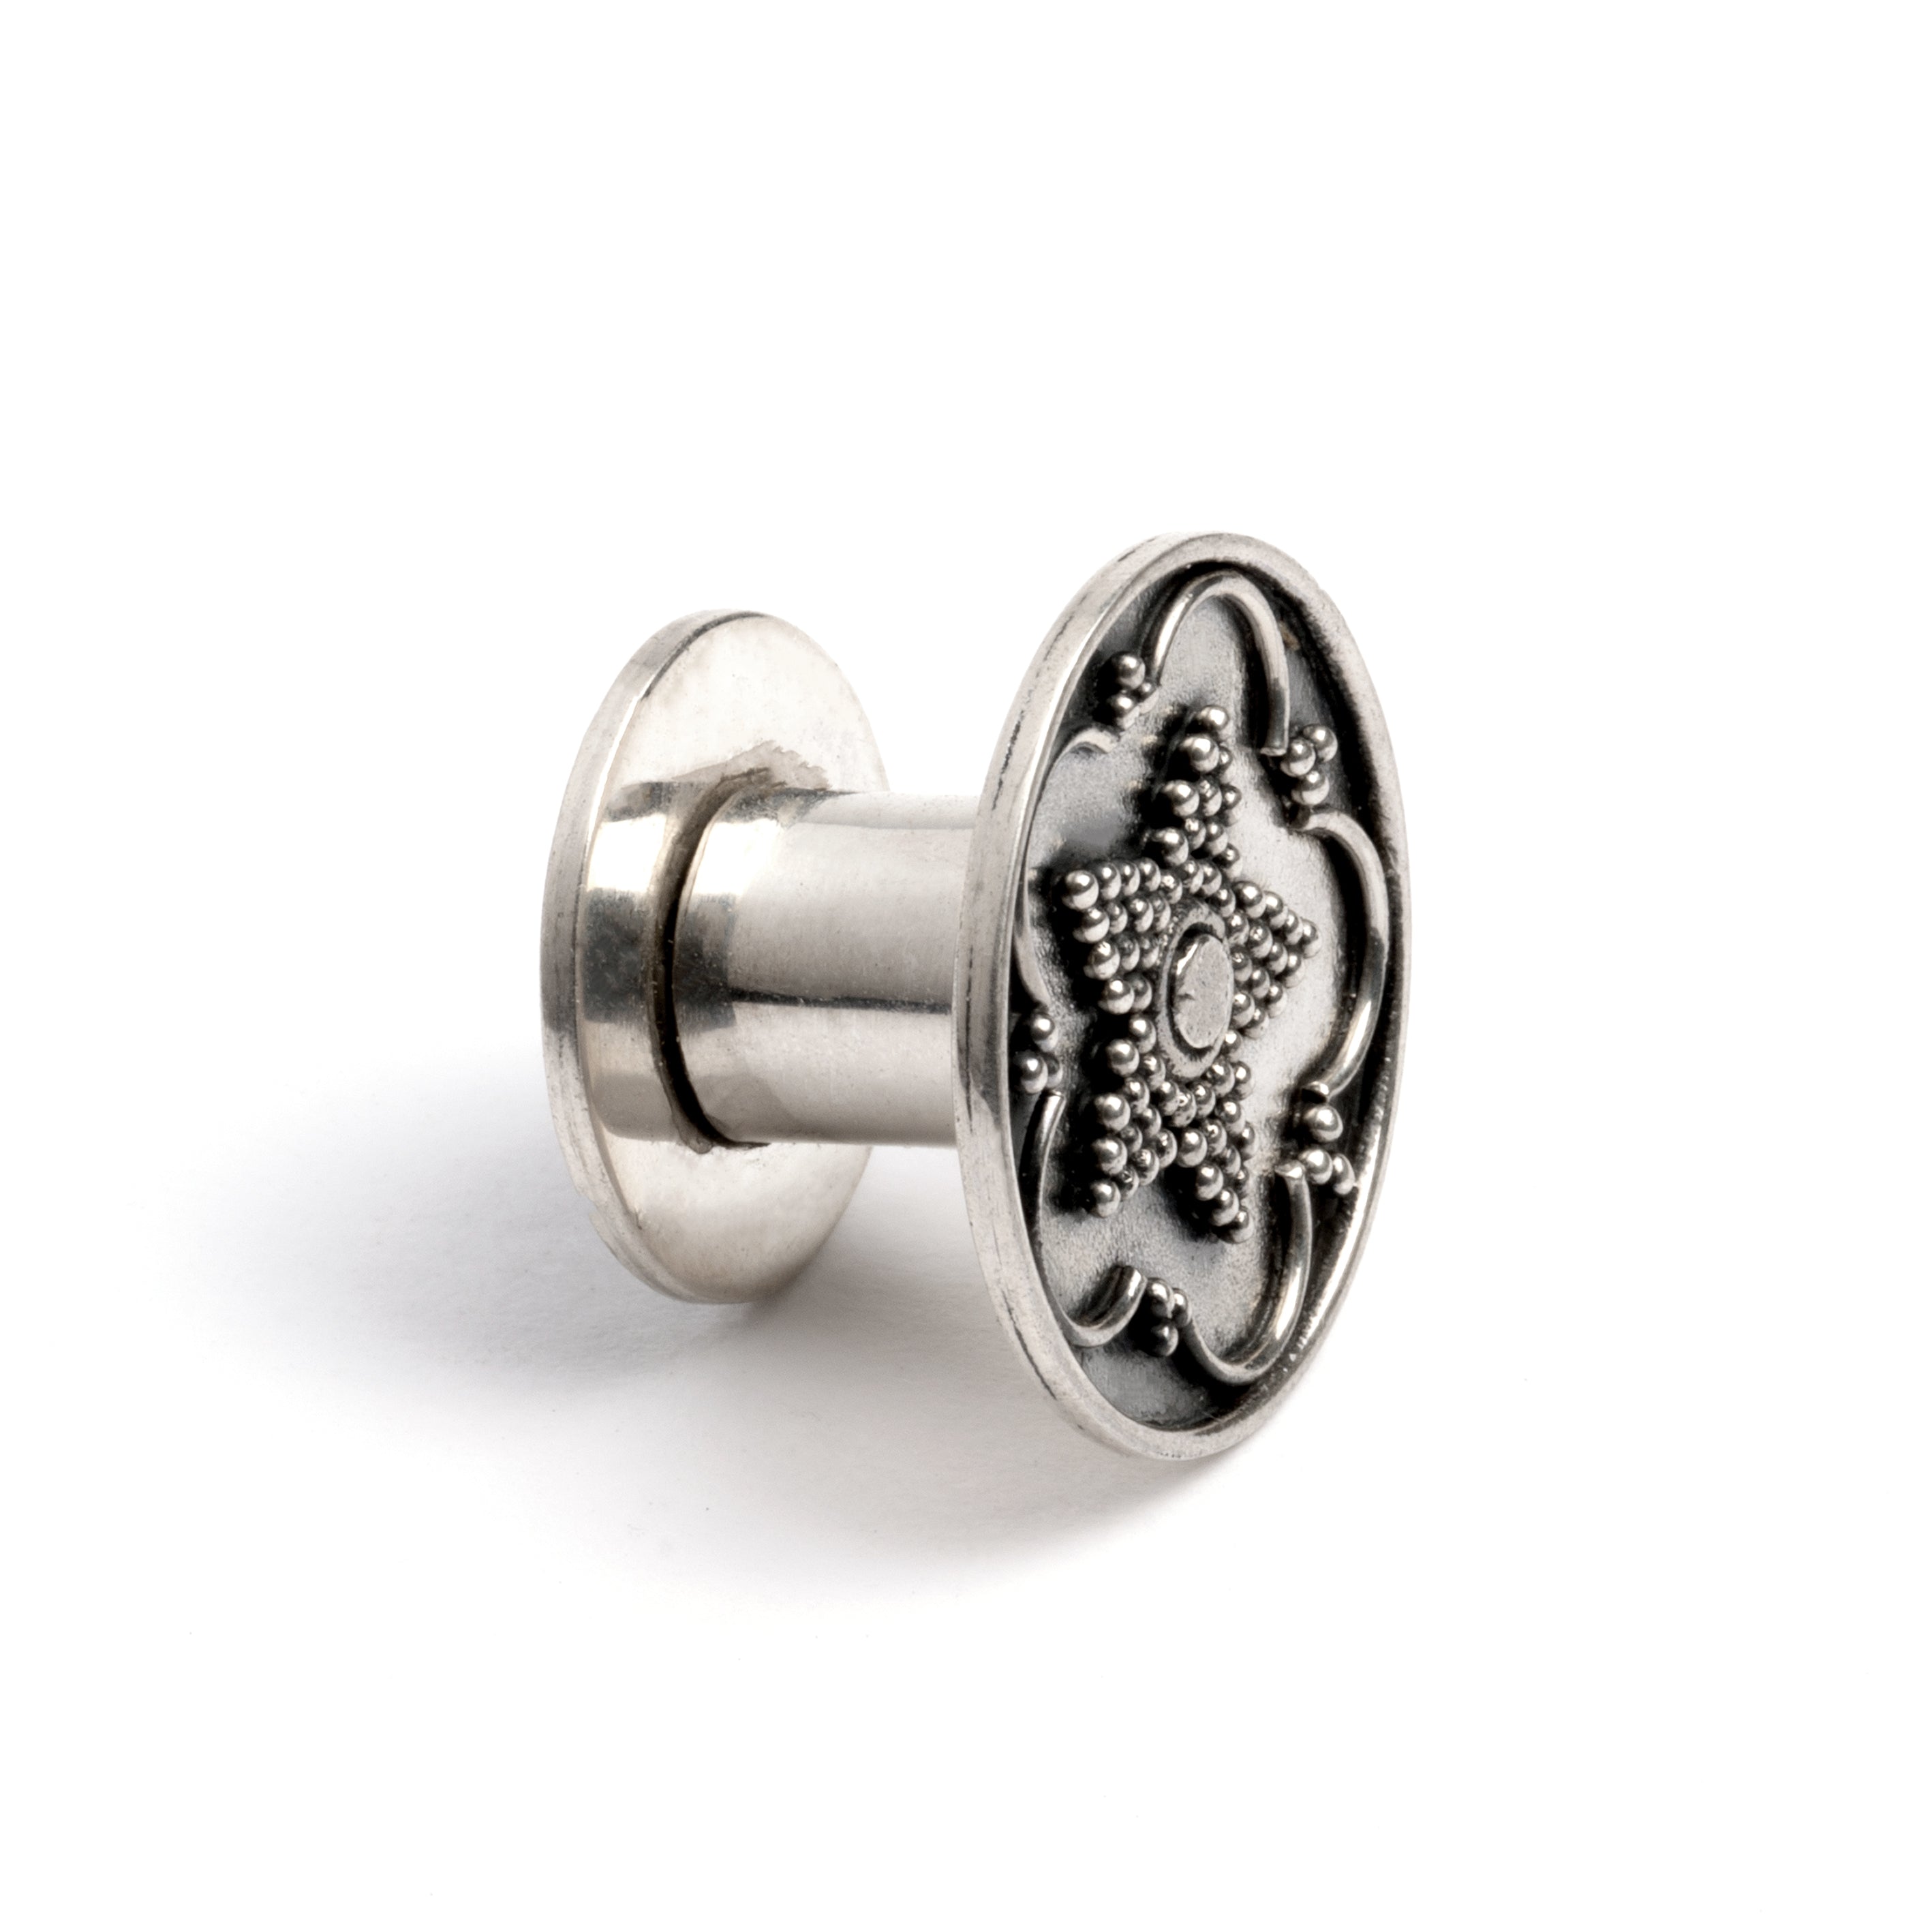 single Antique Silver Plug Tunnel with star ornament and a screw on closure side view